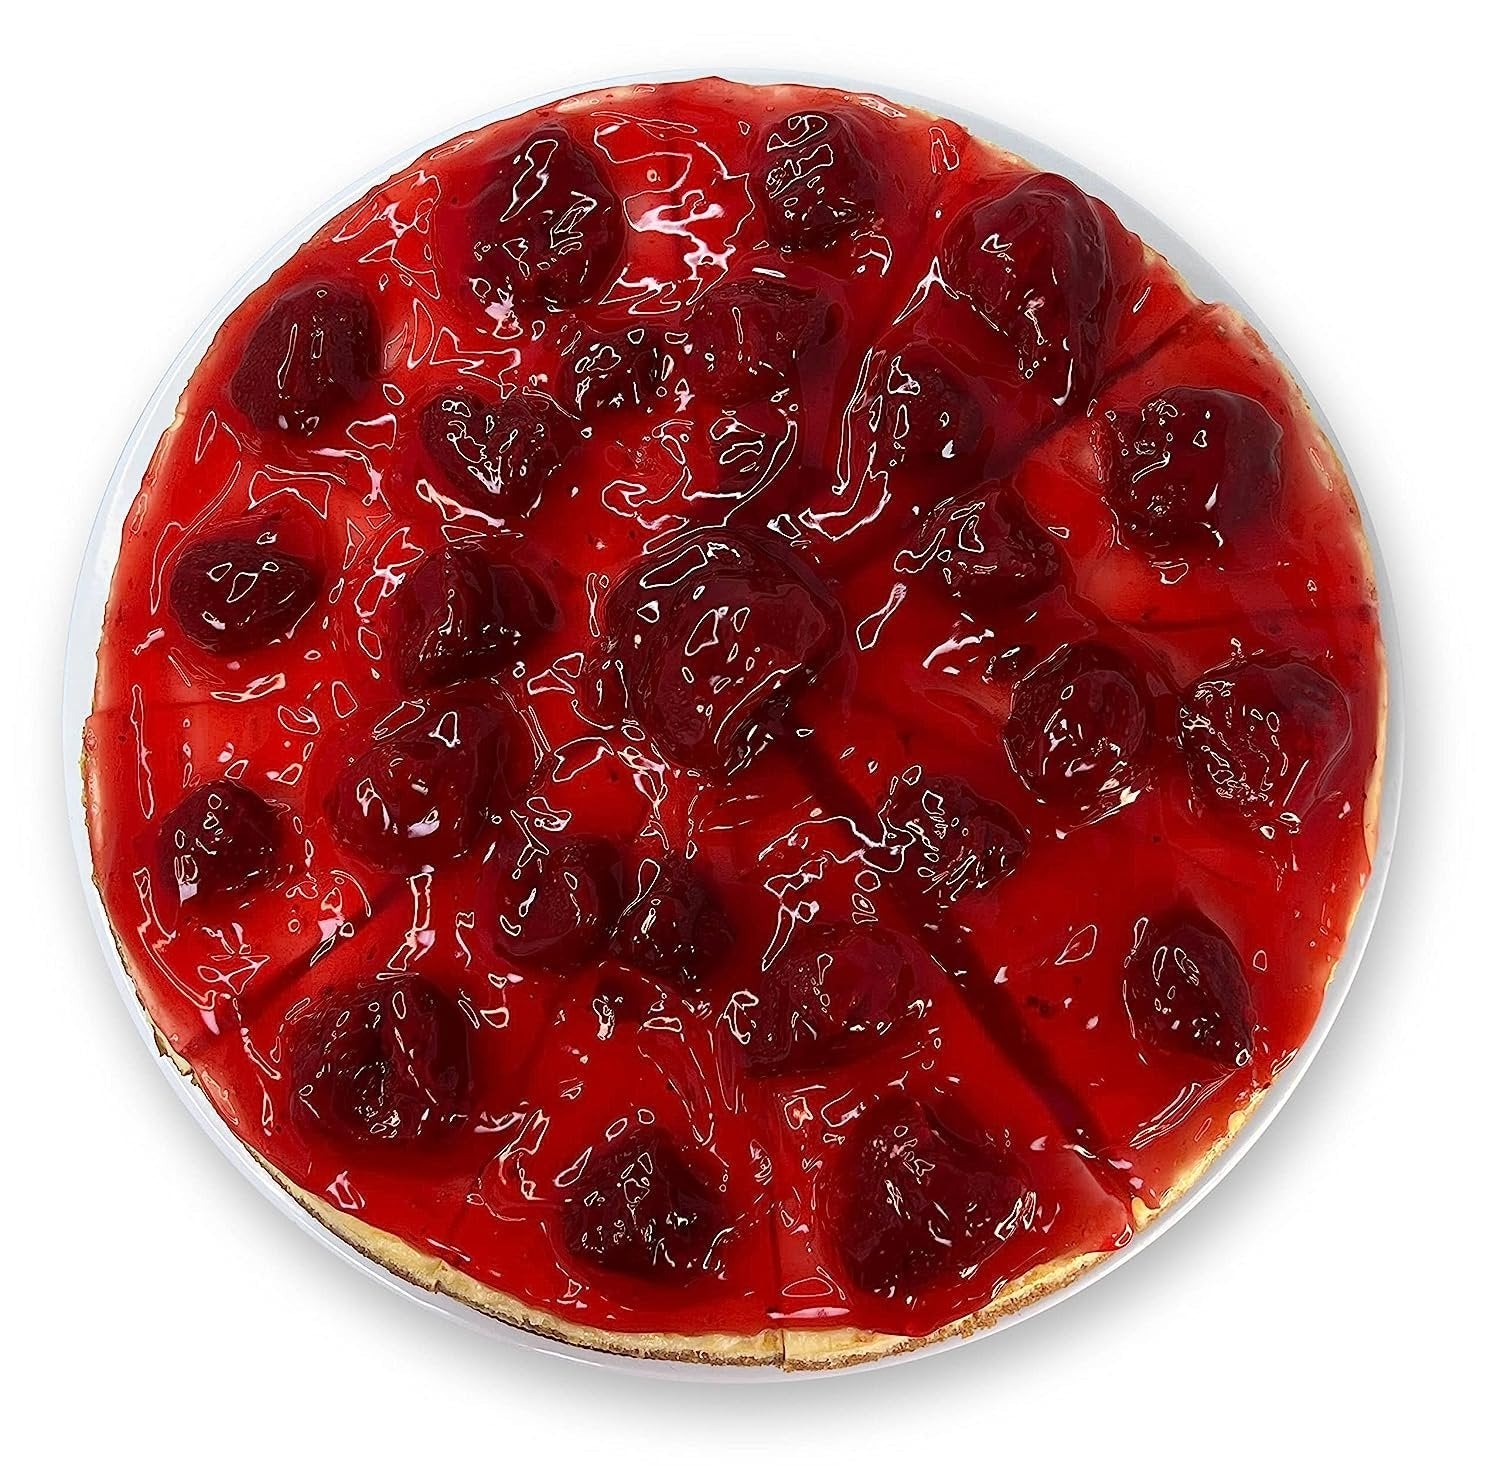 Andy Anand Strawberry Swirl Cheesecake 9" - Decadent Cheesecake for Dessert Lovers